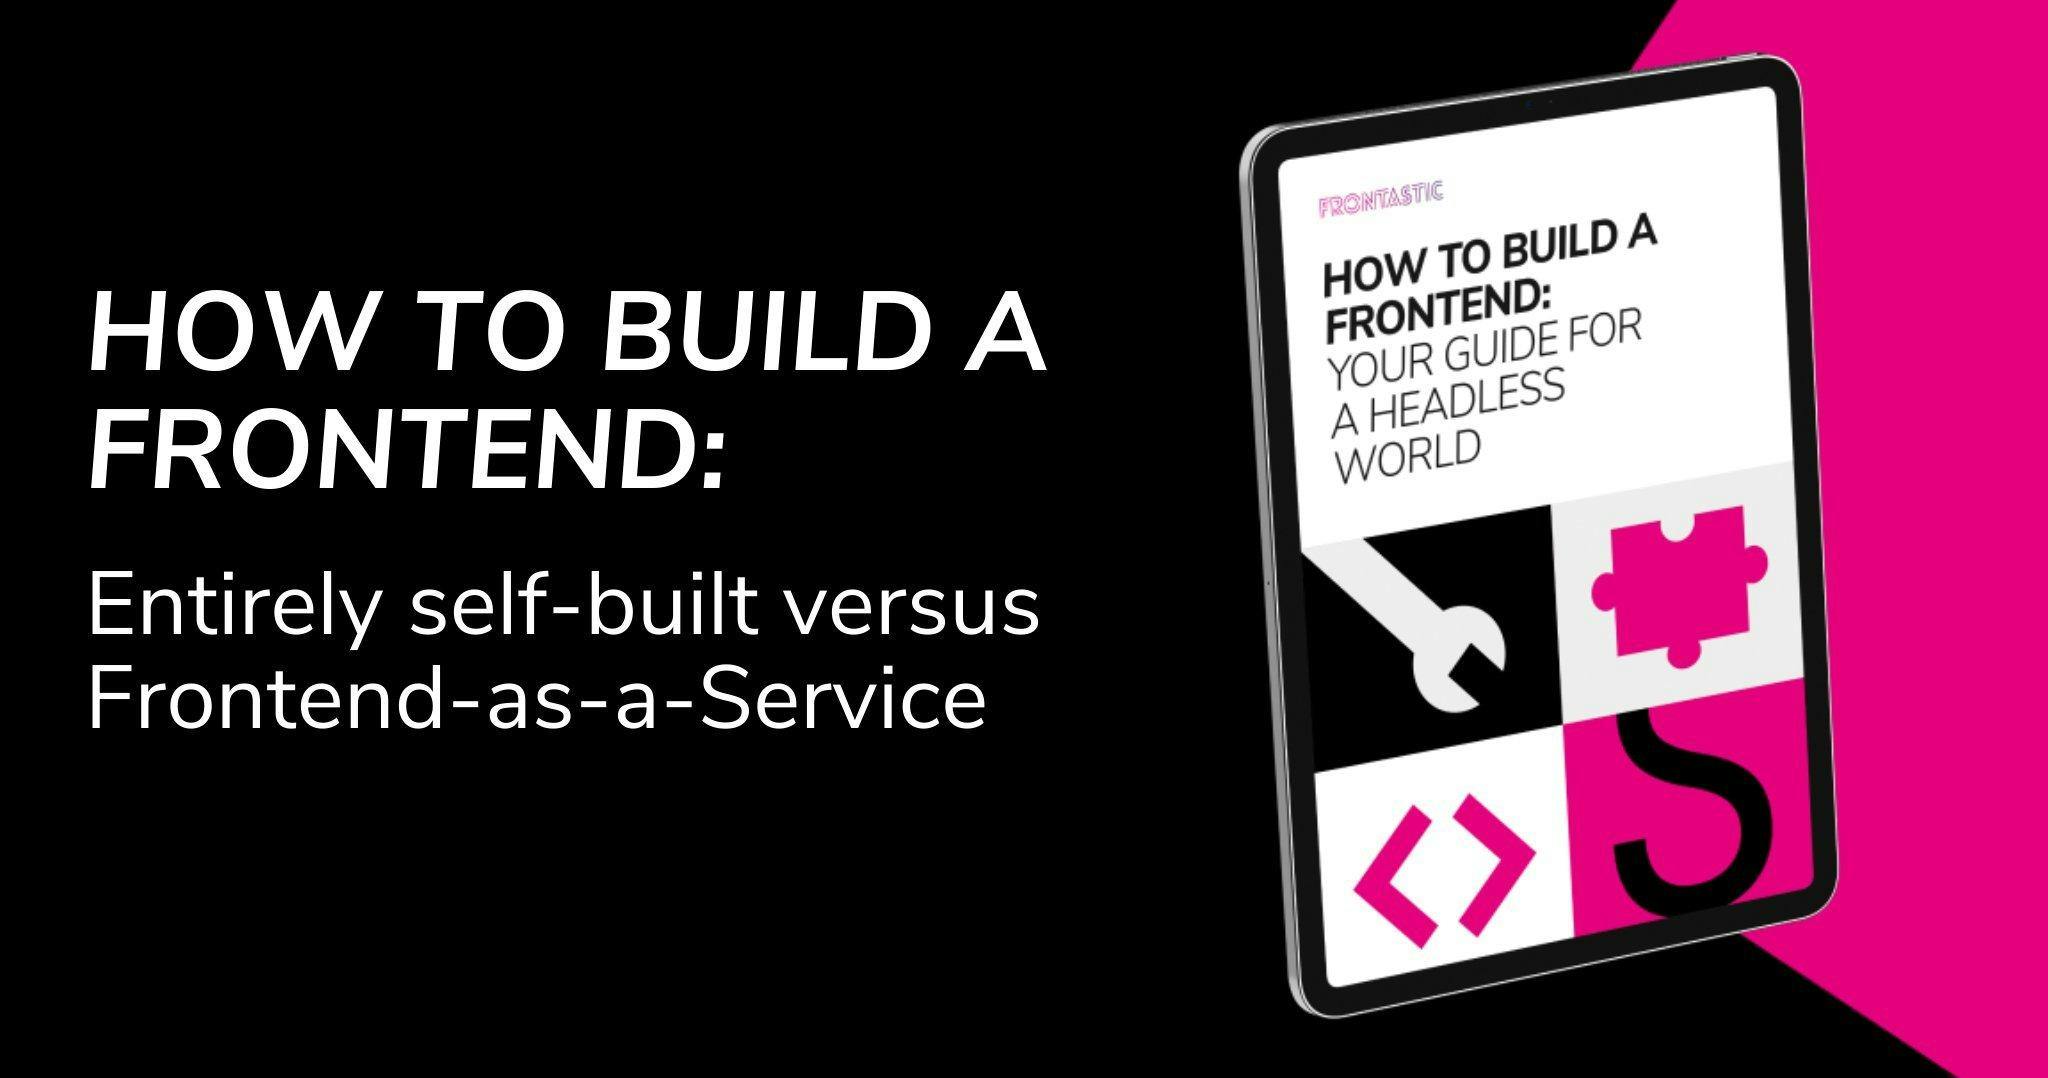 Building a frontend: Entirely self-built versus Frontend-as-a-Service